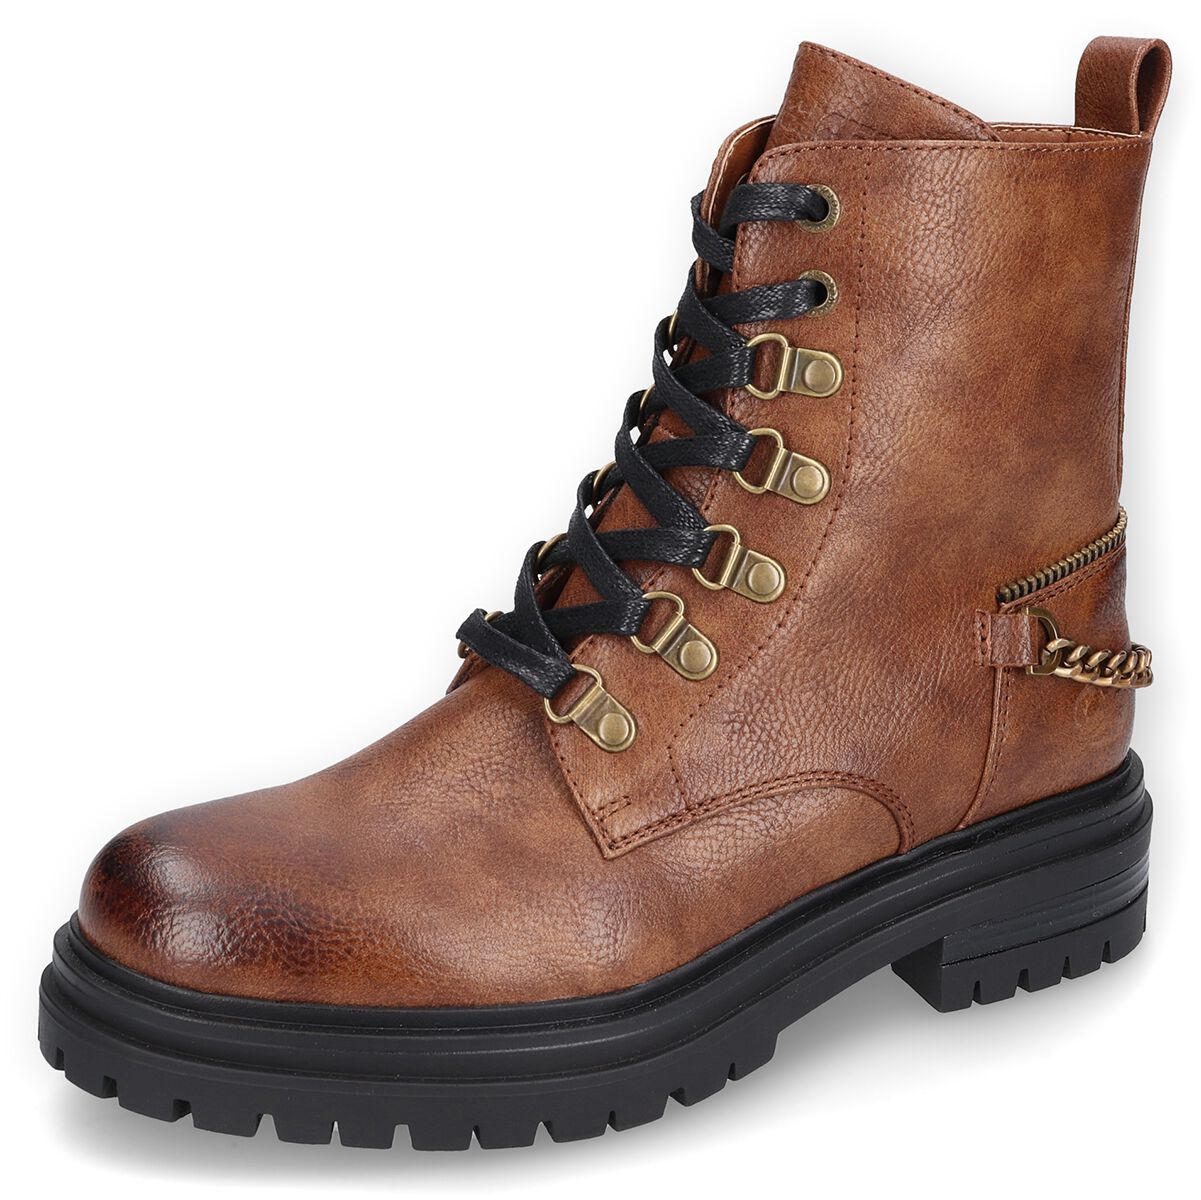 Image of Stivali di Dockers by Gerli - Lace-Up Boots - EU38 a EU40 - Donna - marrone